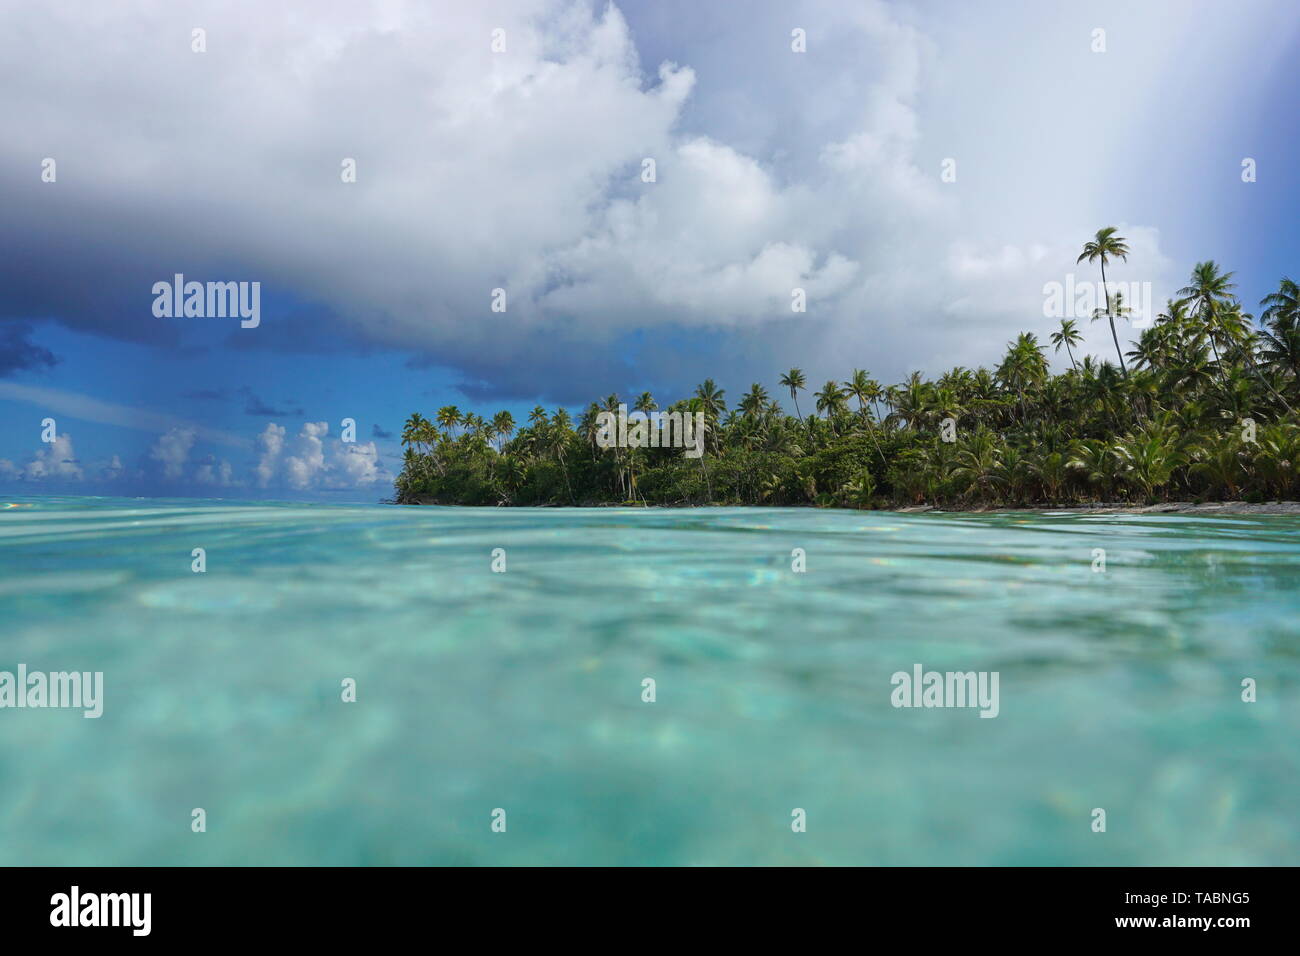 Tropical island coast with lush vegetation seen from water surface, French Polynesia, Huahine, Pacific ocean Stock Photo